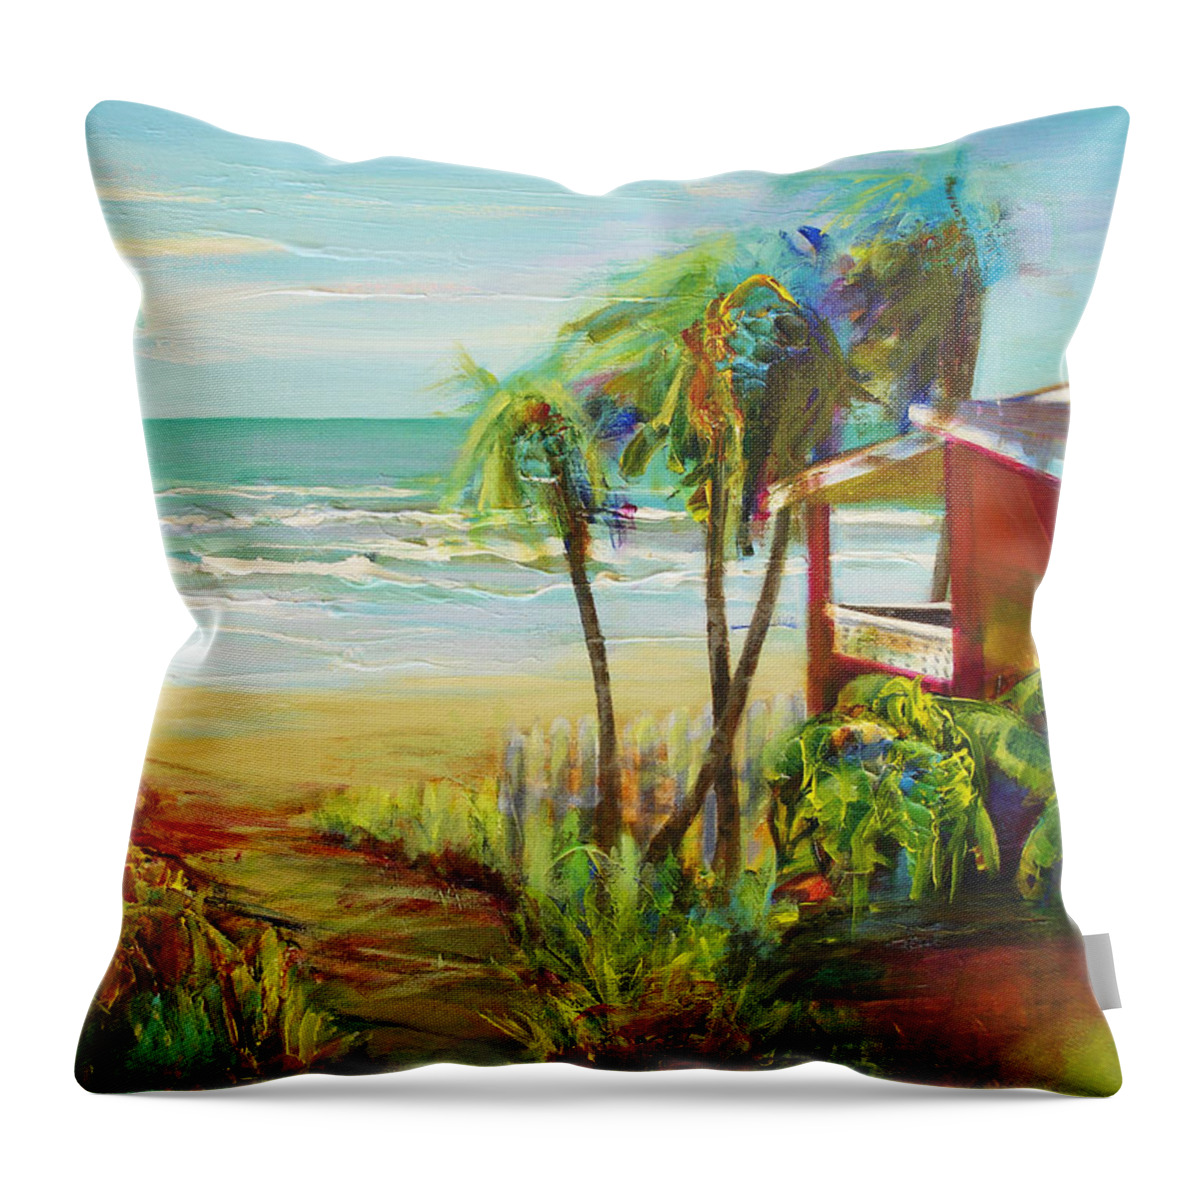 Abstract Throw Pillow featuring the painting Beach House by Cynthia McLean